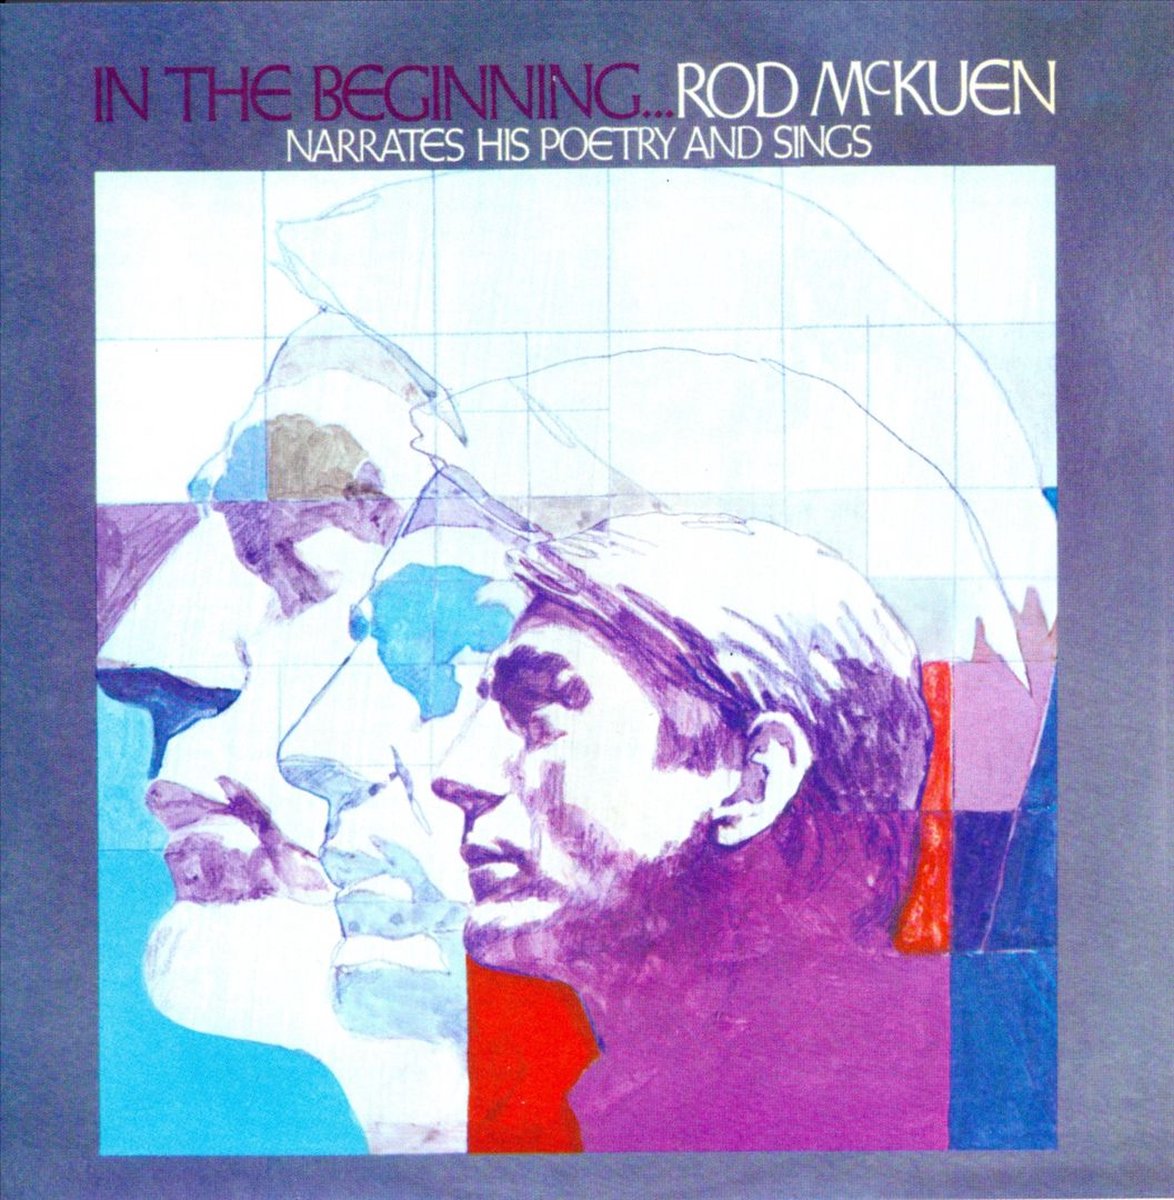 In The Beginning...Narrates His Poetry & Sings - Rod McKuen & Molly Bee